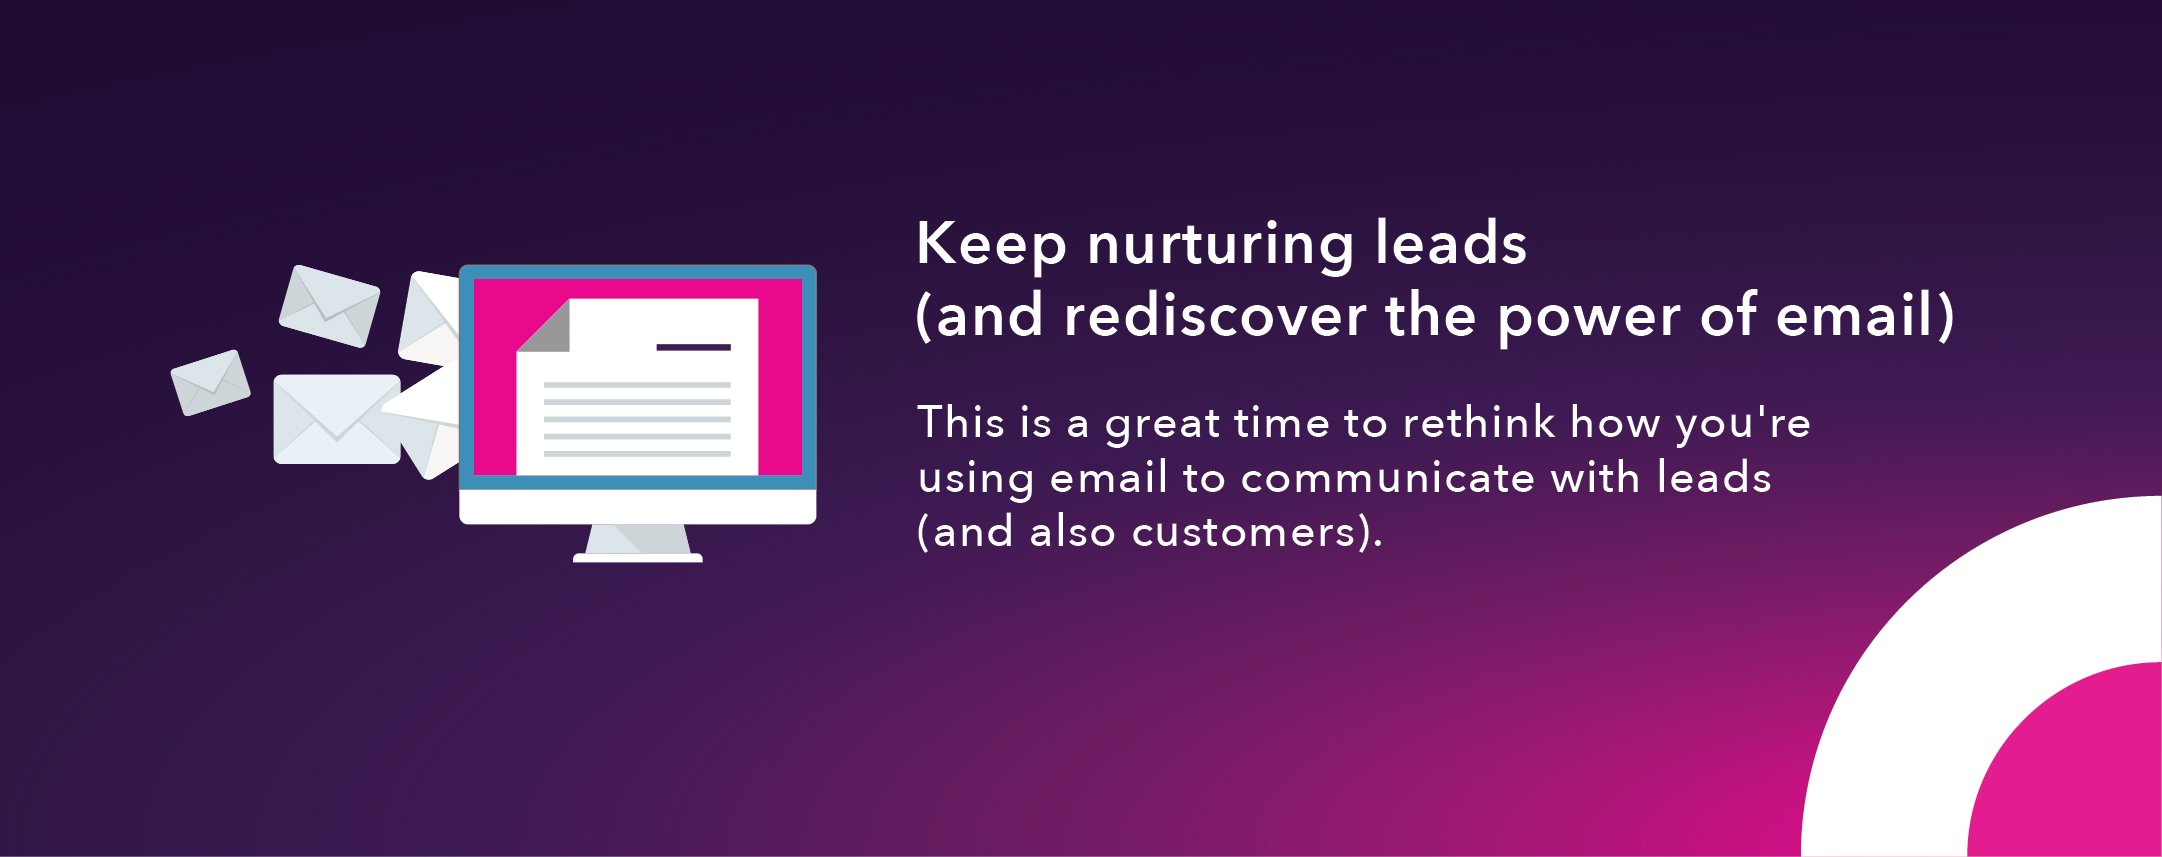 6. Keep nurturing leads (and rediscover the power of email)